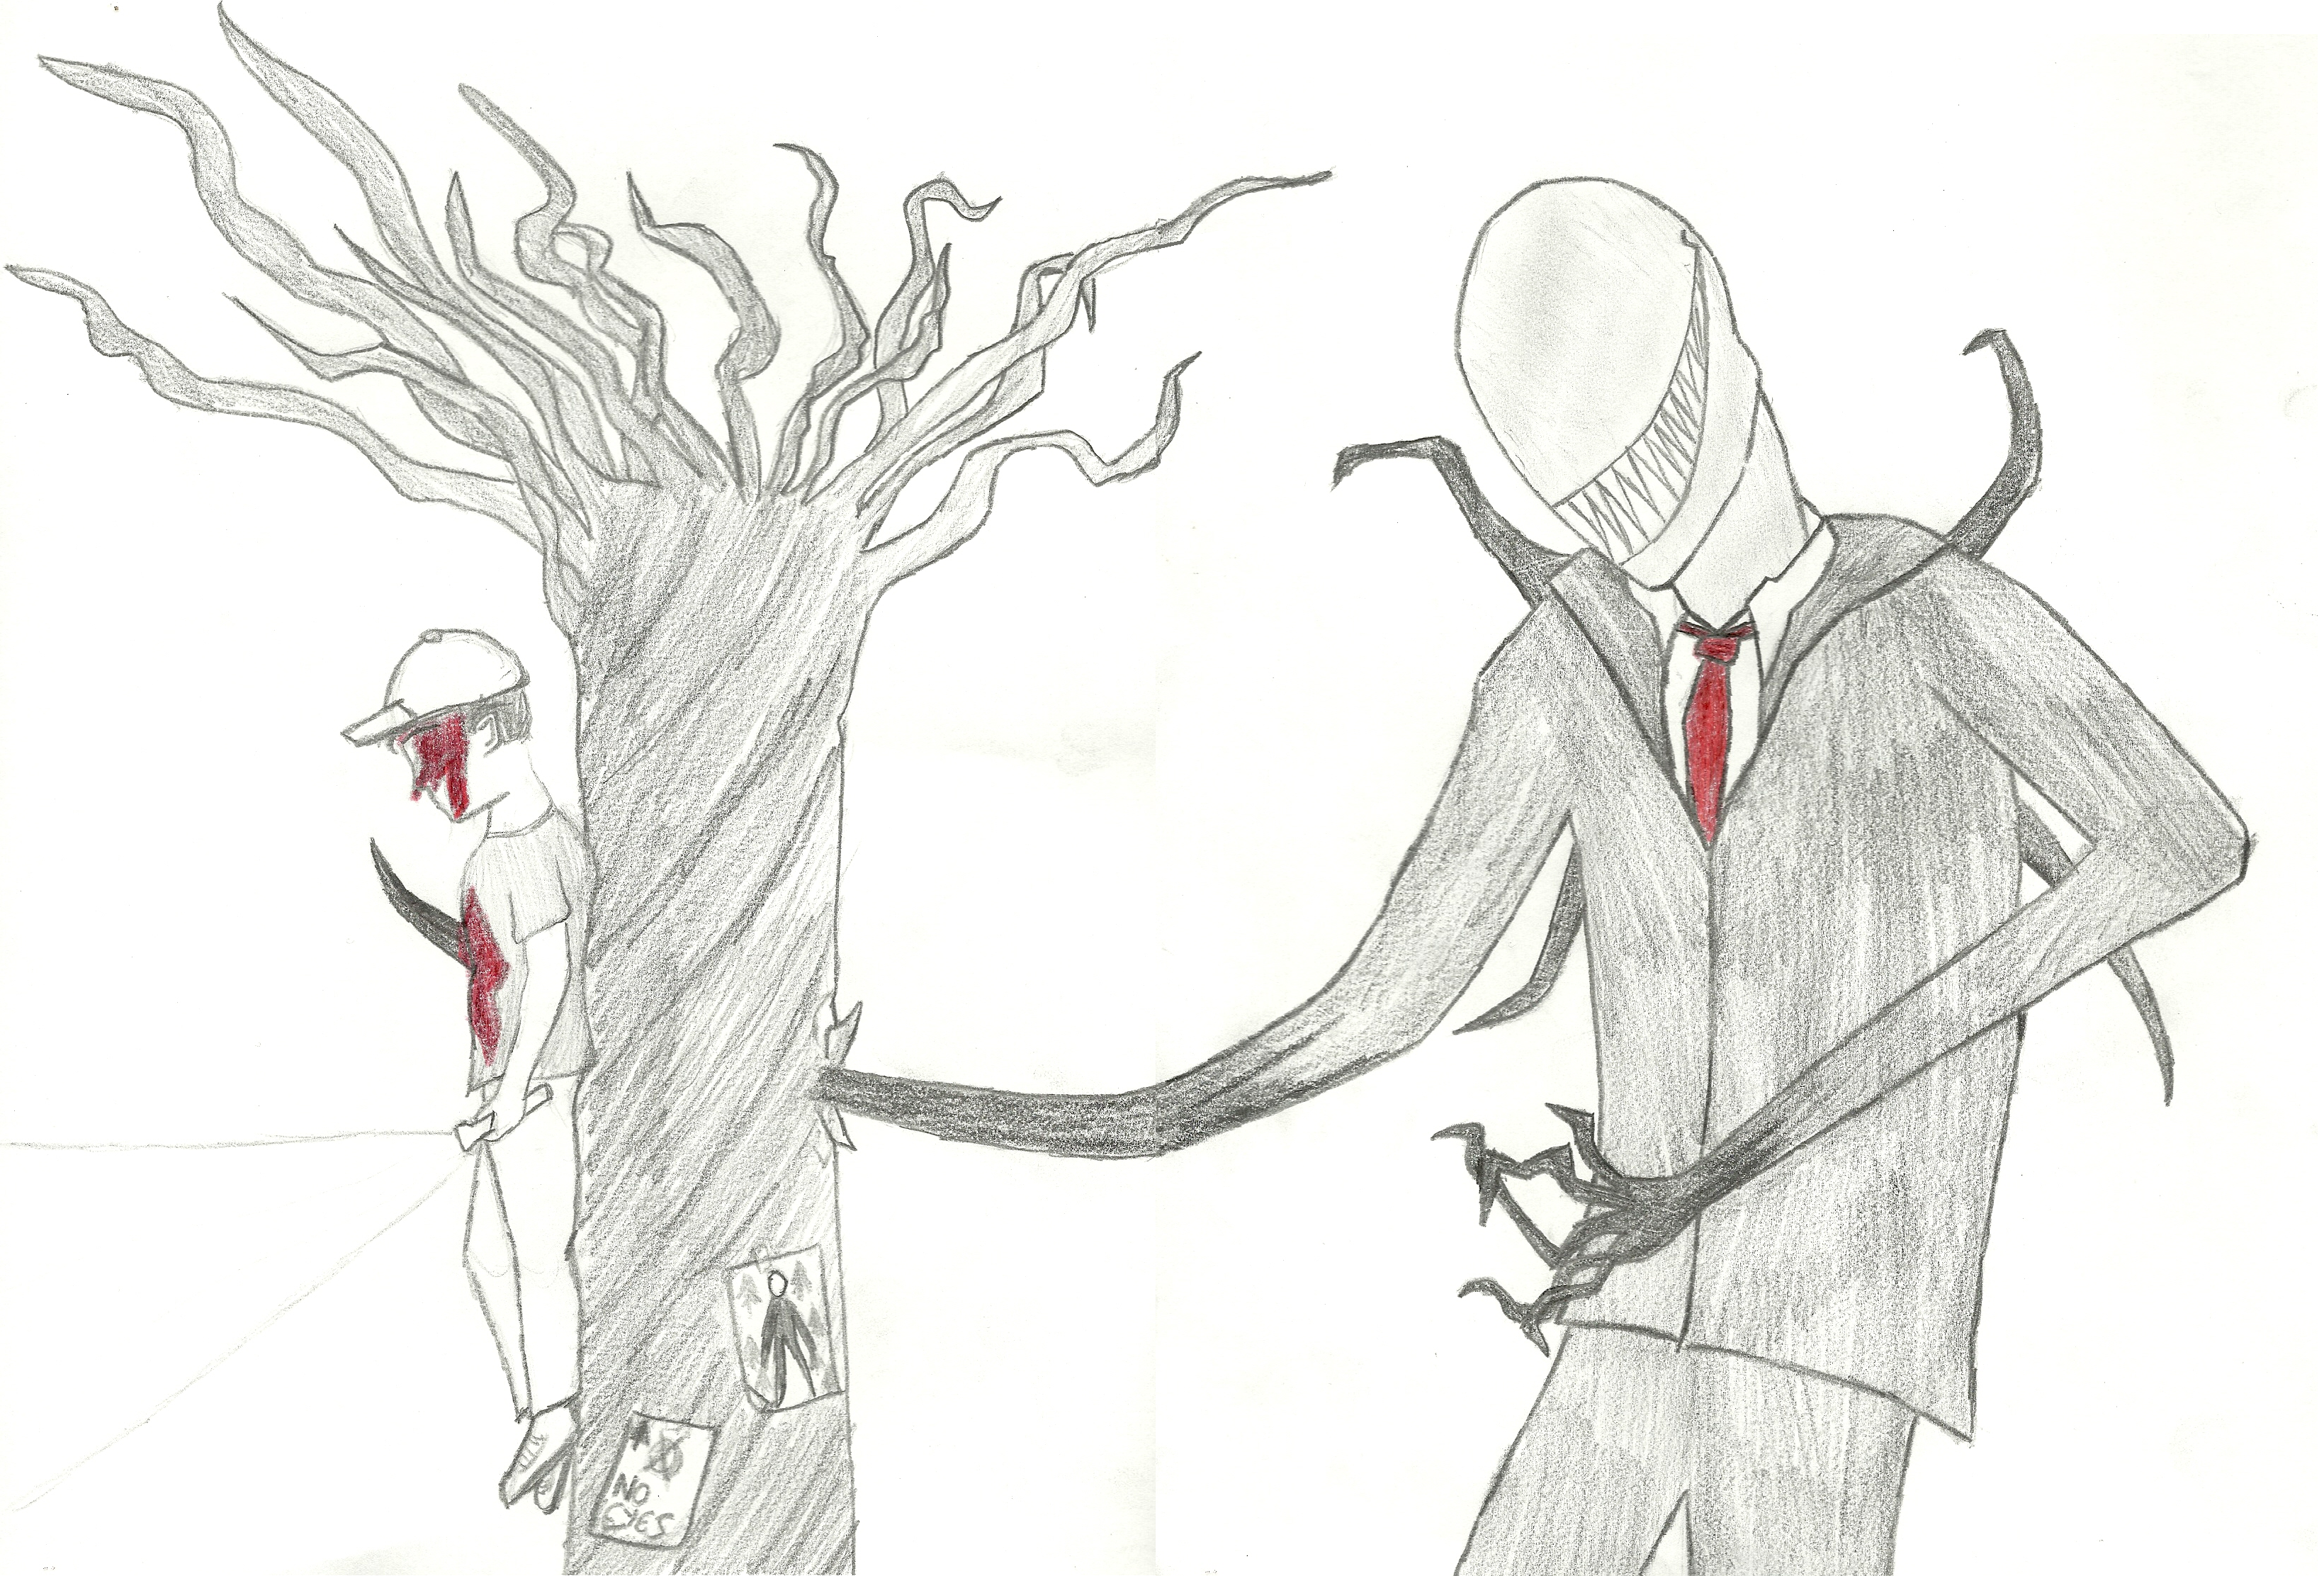  Slender Man Drawing Sketch with Realistic